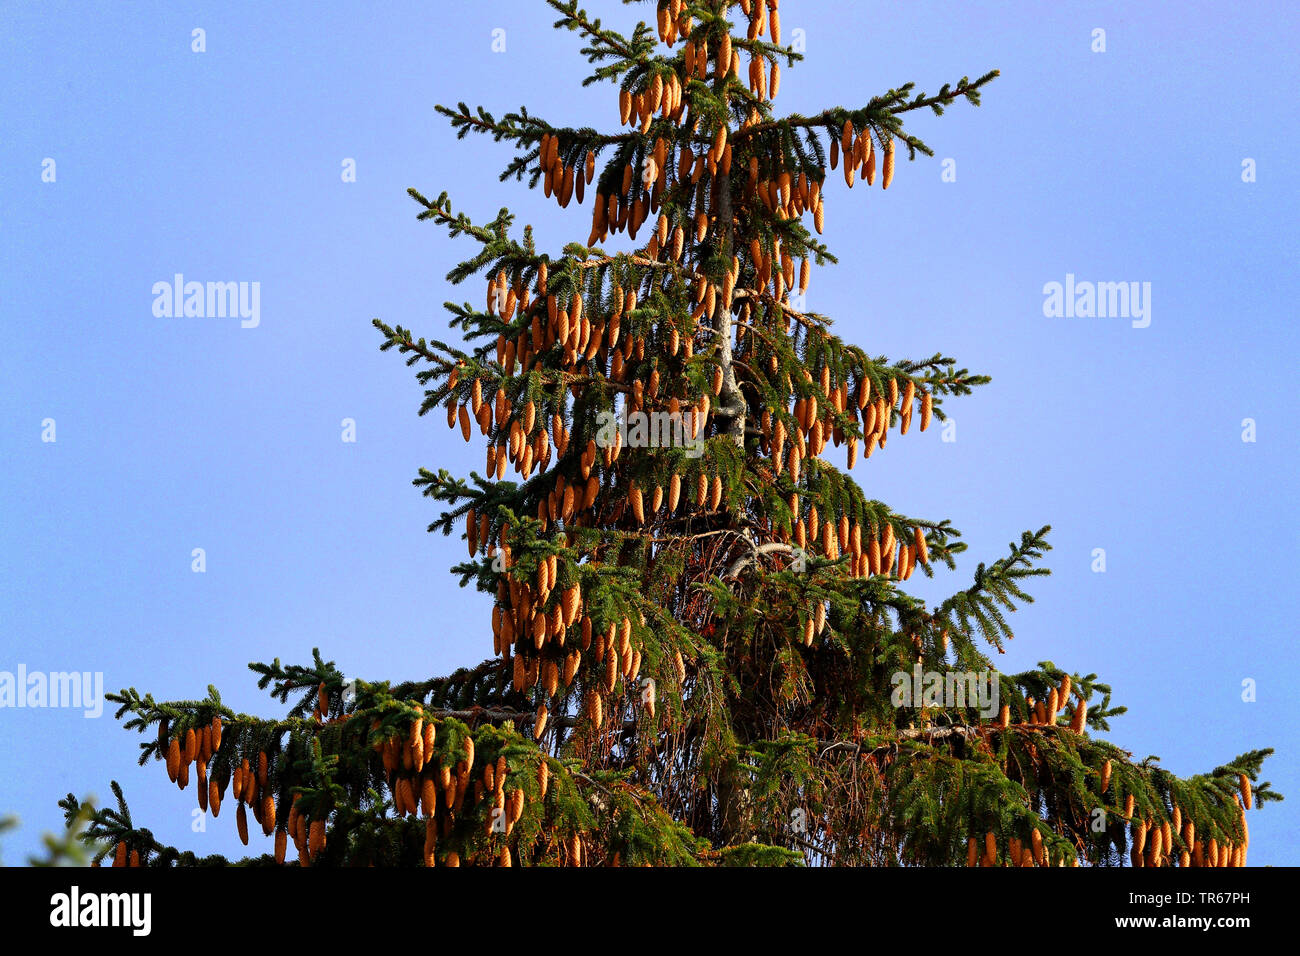 Norway spruce (Picea abies), crown with mature cones, Germany, Mecklenburg-Western Pomerania Stock Photo